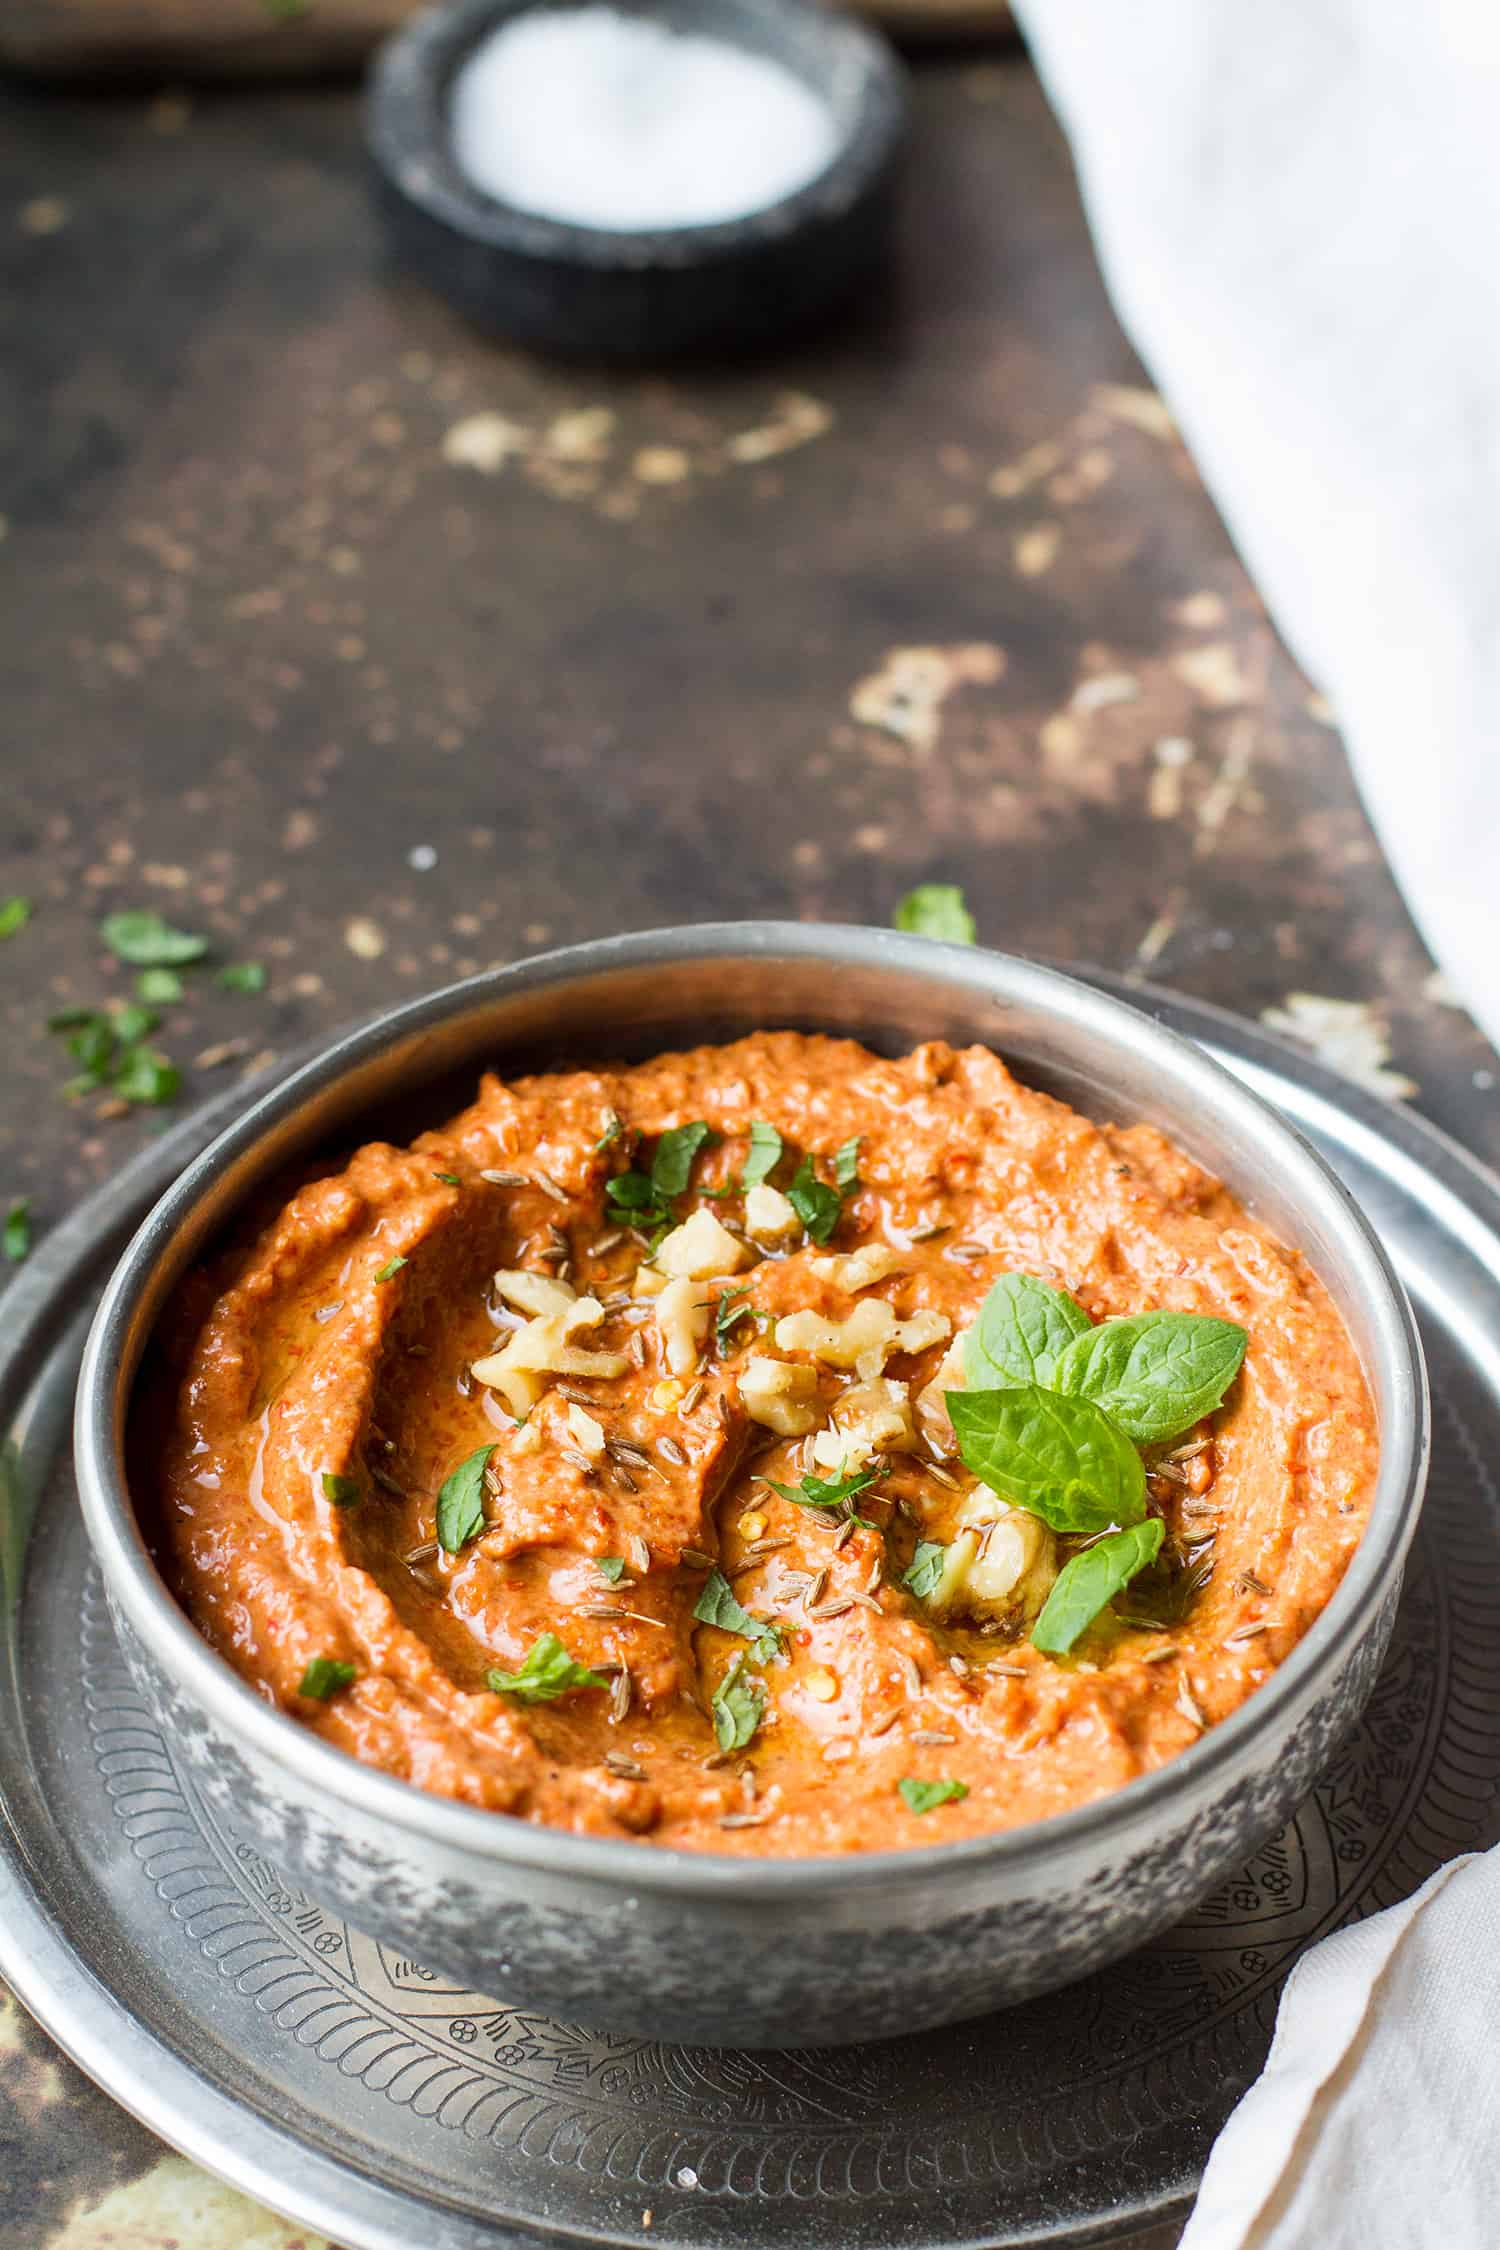 Muhammara dip in a metal bowl, with nuts and herbs as toppings.